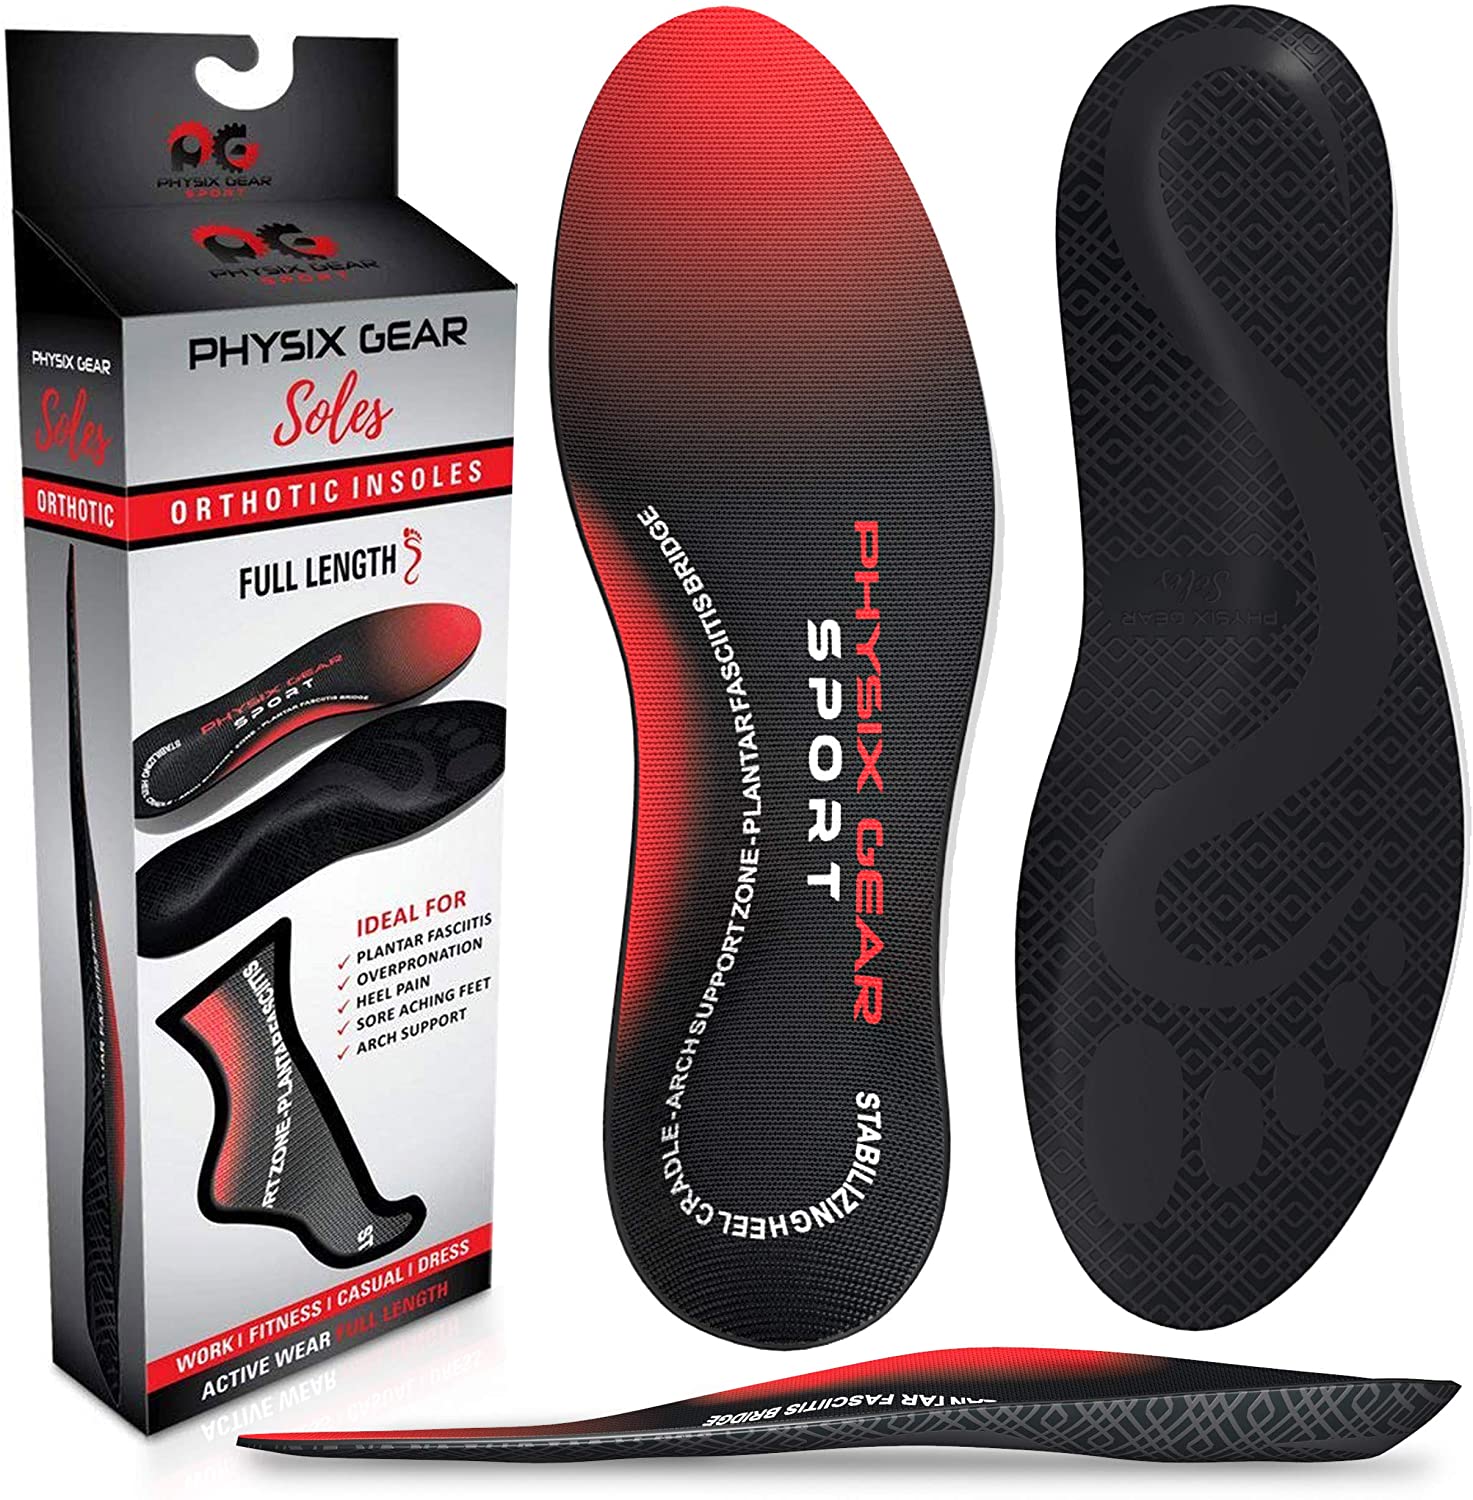 Physix Gear Sport Full Length Orthotic Inserts with Arch Support - Best Shoe Insoles for Plantar Fasciitis, Running, Flat Feet, Heel Spurs & Foot Pain - For Men & Women